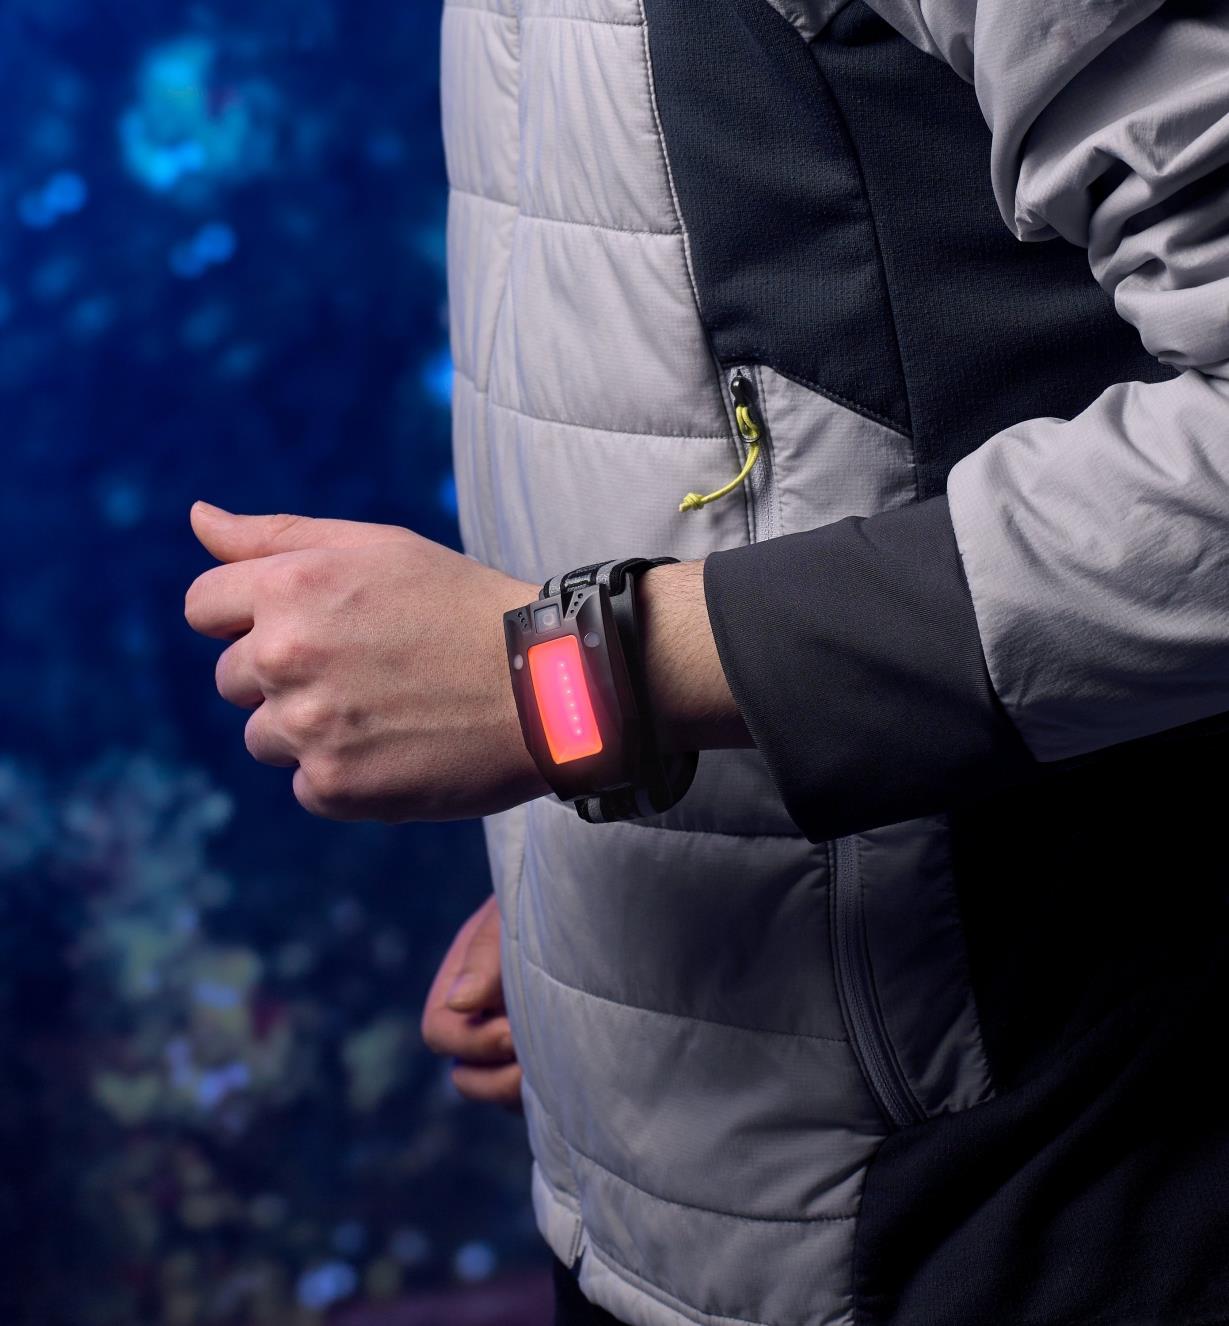 The multi-function LED headlamp is worn on a runner’s wrist